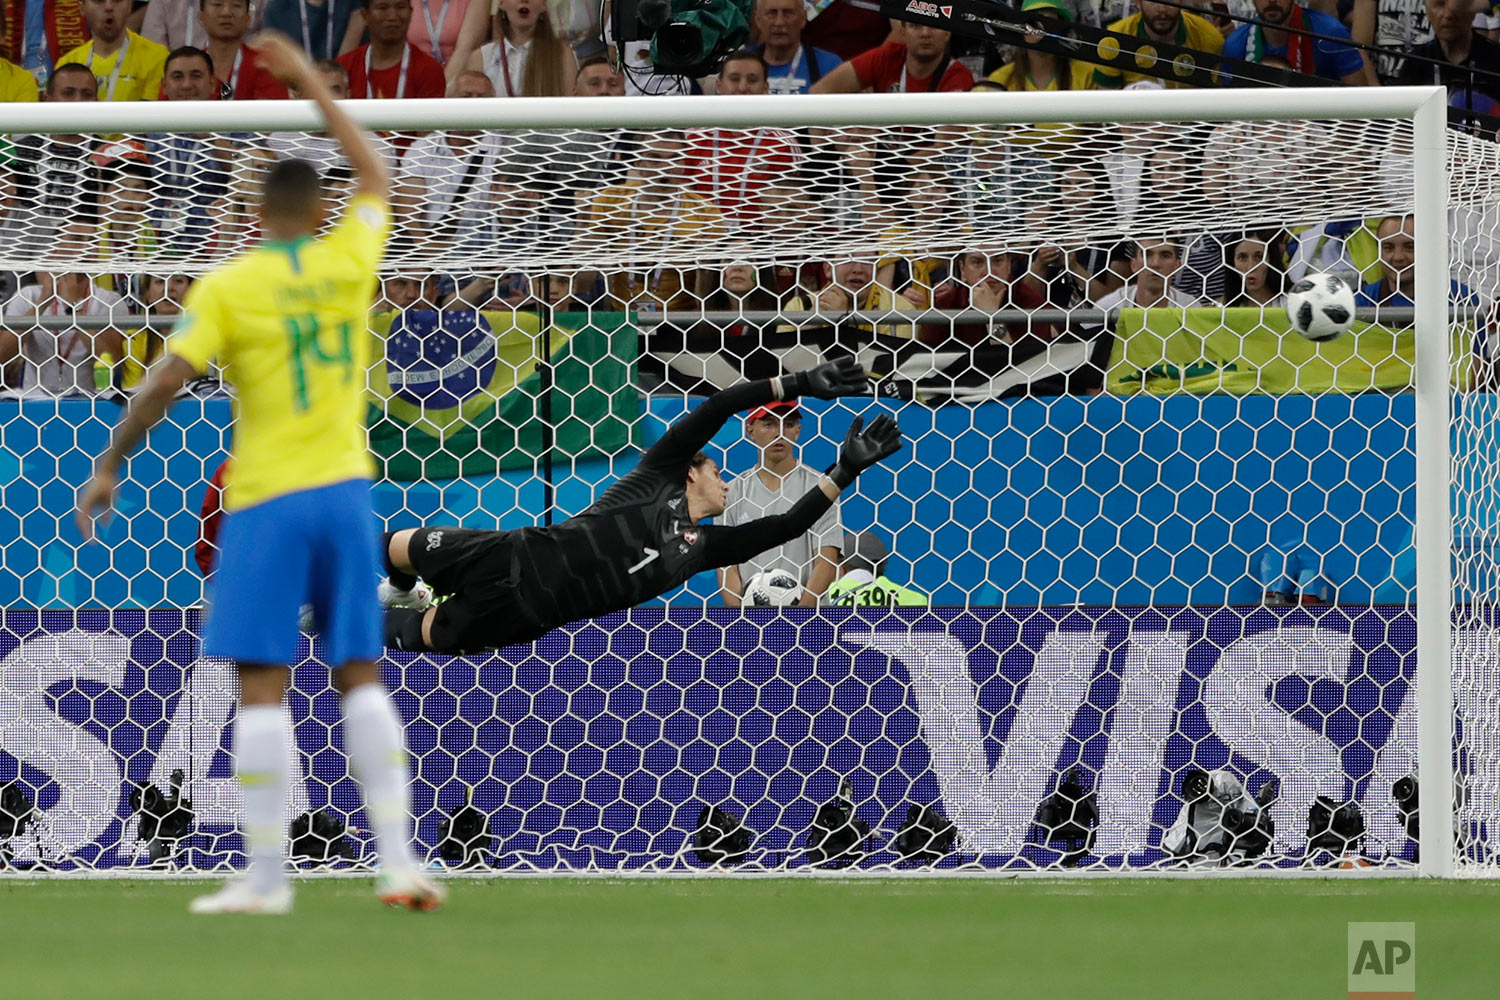  Switzerland goalkeeper Yann Sommer can't stop a shot from Brazil's Philippe Coutinho during the group E match between Brazil and Switzerland at the 2018 soccer World Cup in the Rostov Arena in Rostov-on-Don, Russia, Sunday, June 17, 2018. (AP Photo/